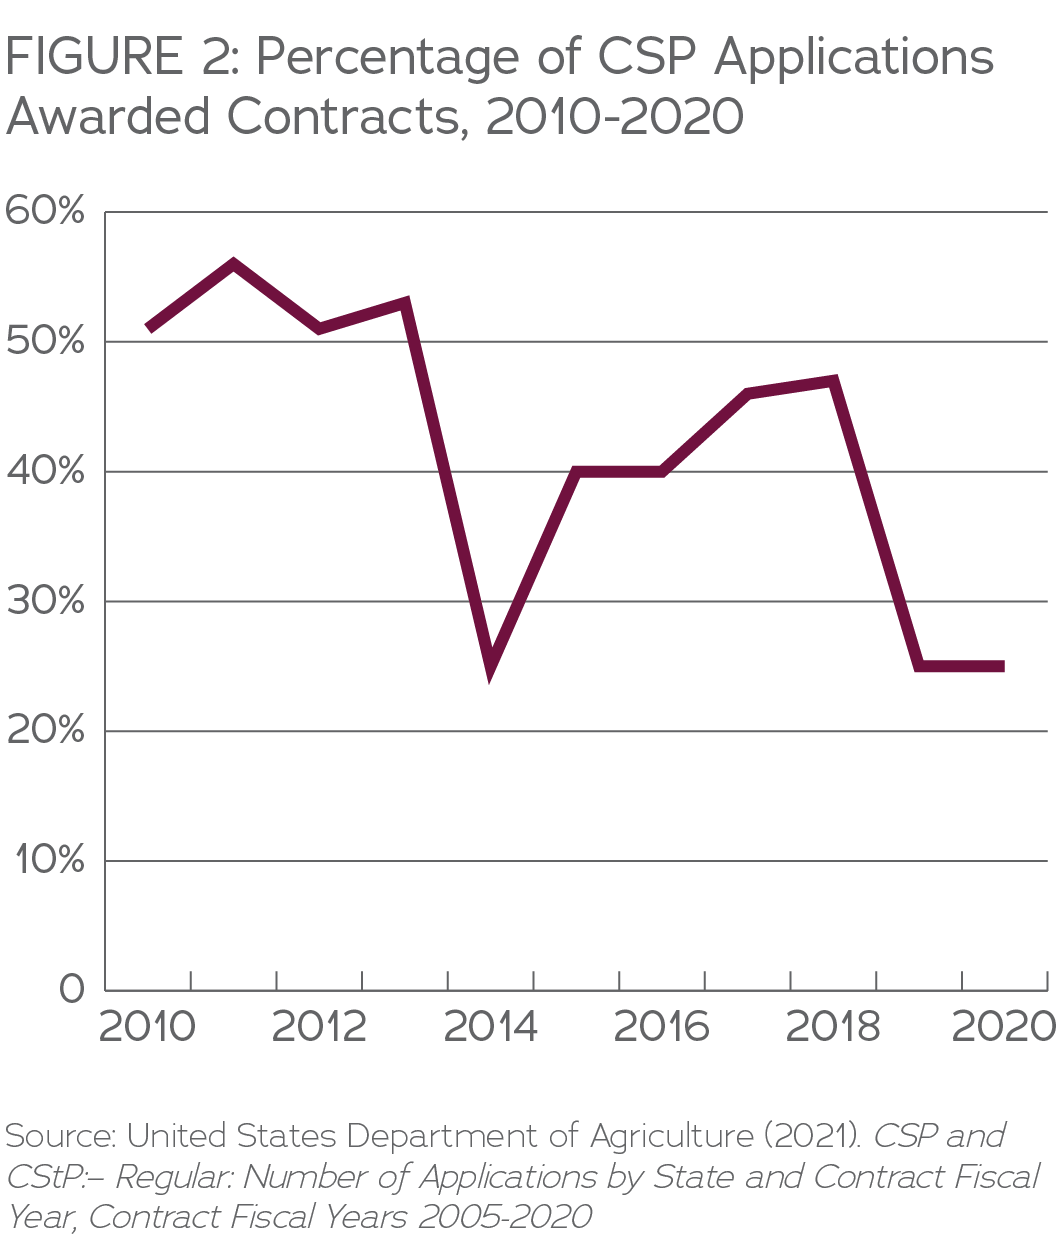 Percentage of CSP Applications Awarded Contracts